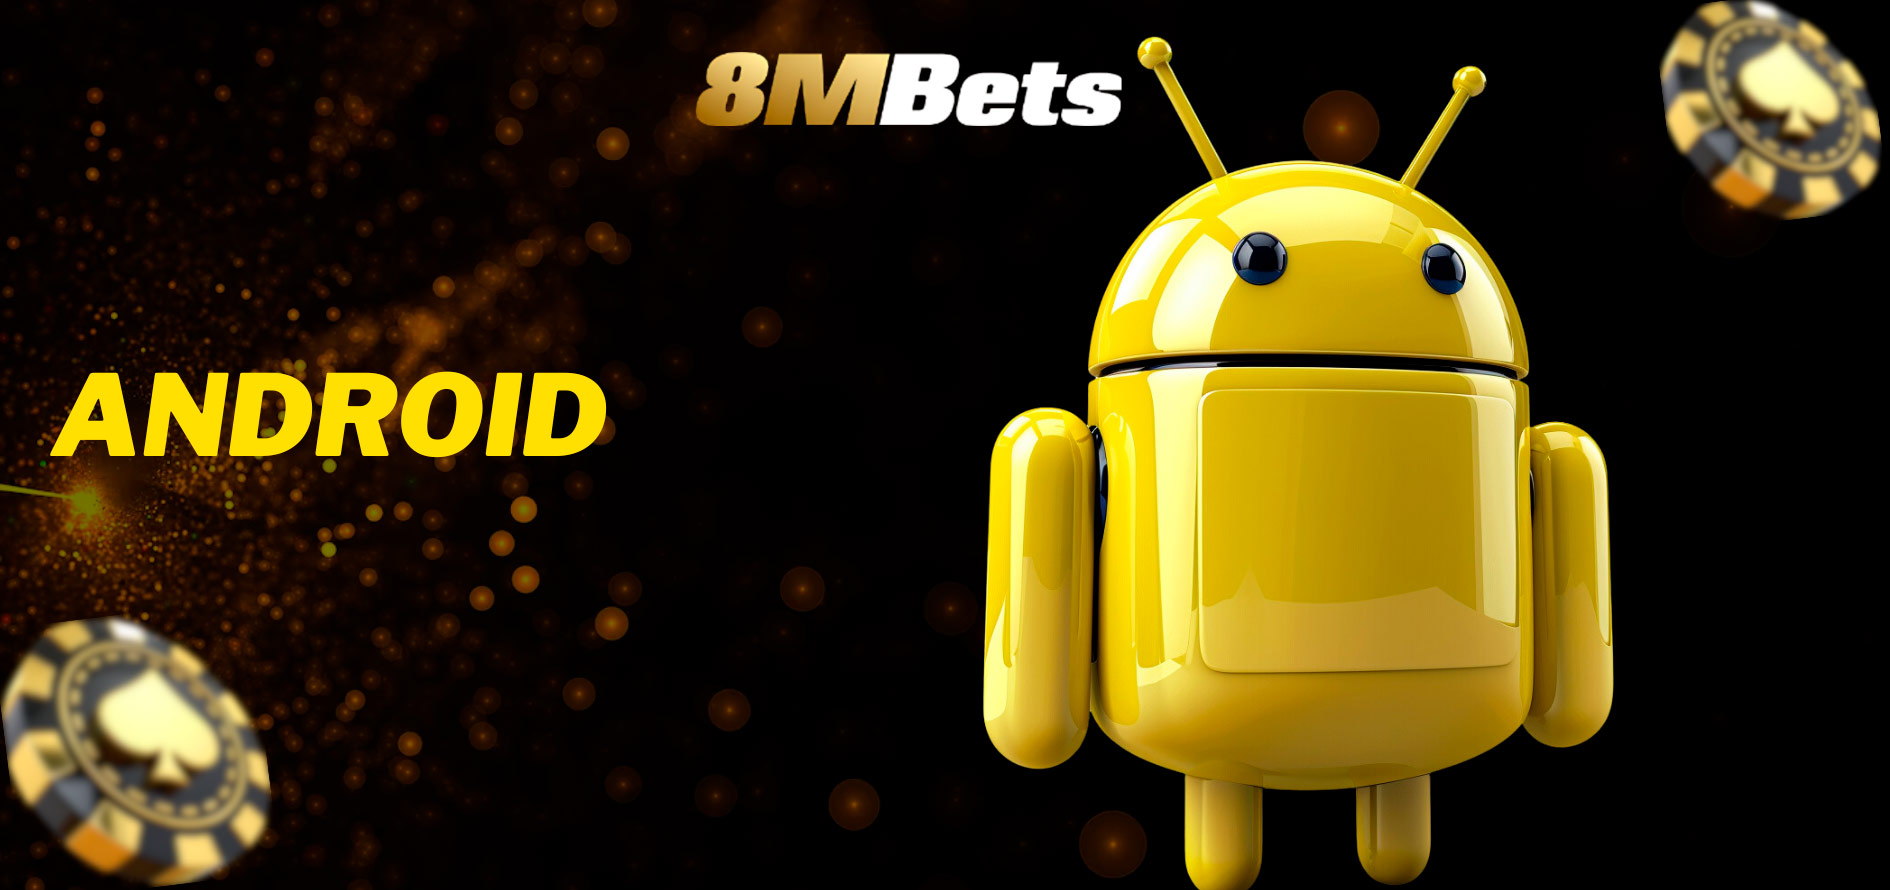 8mbets Download Android: How to Install the Top Gaming App for Your Mobile Device